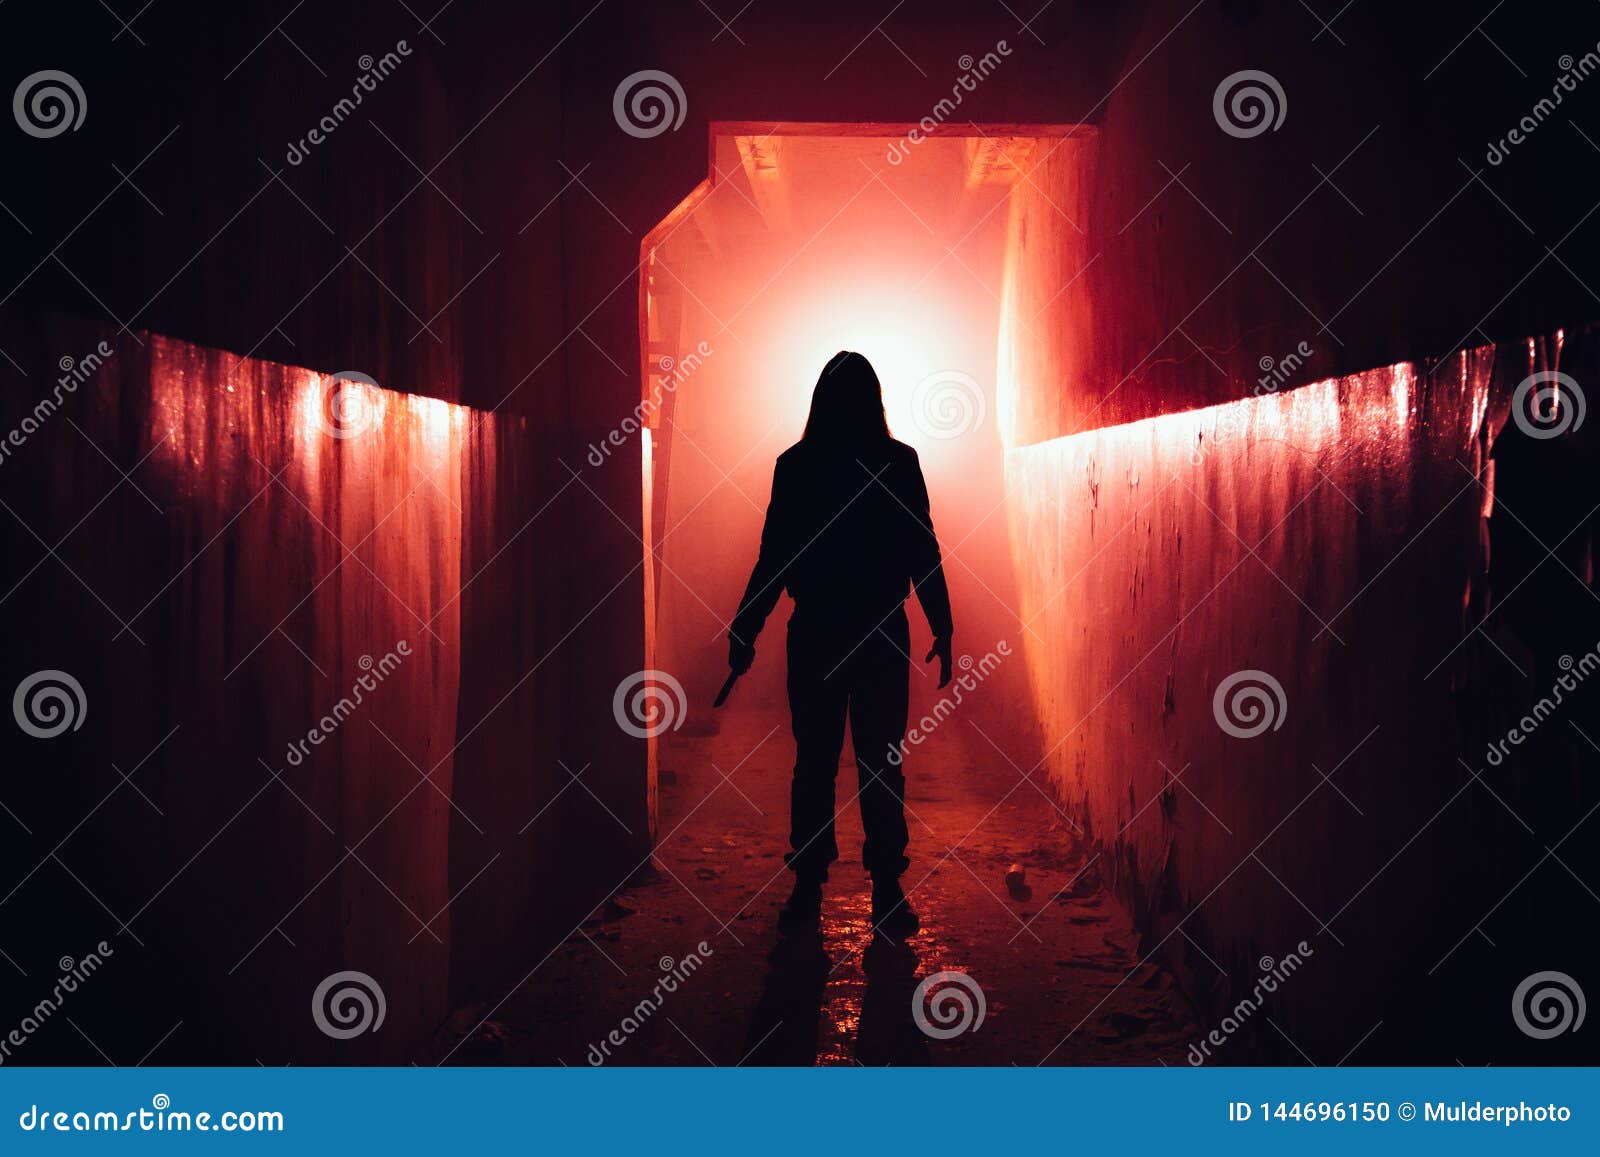 creepy silhouette with knife in the dark red illuminated abandoned building. horror about maniac concept